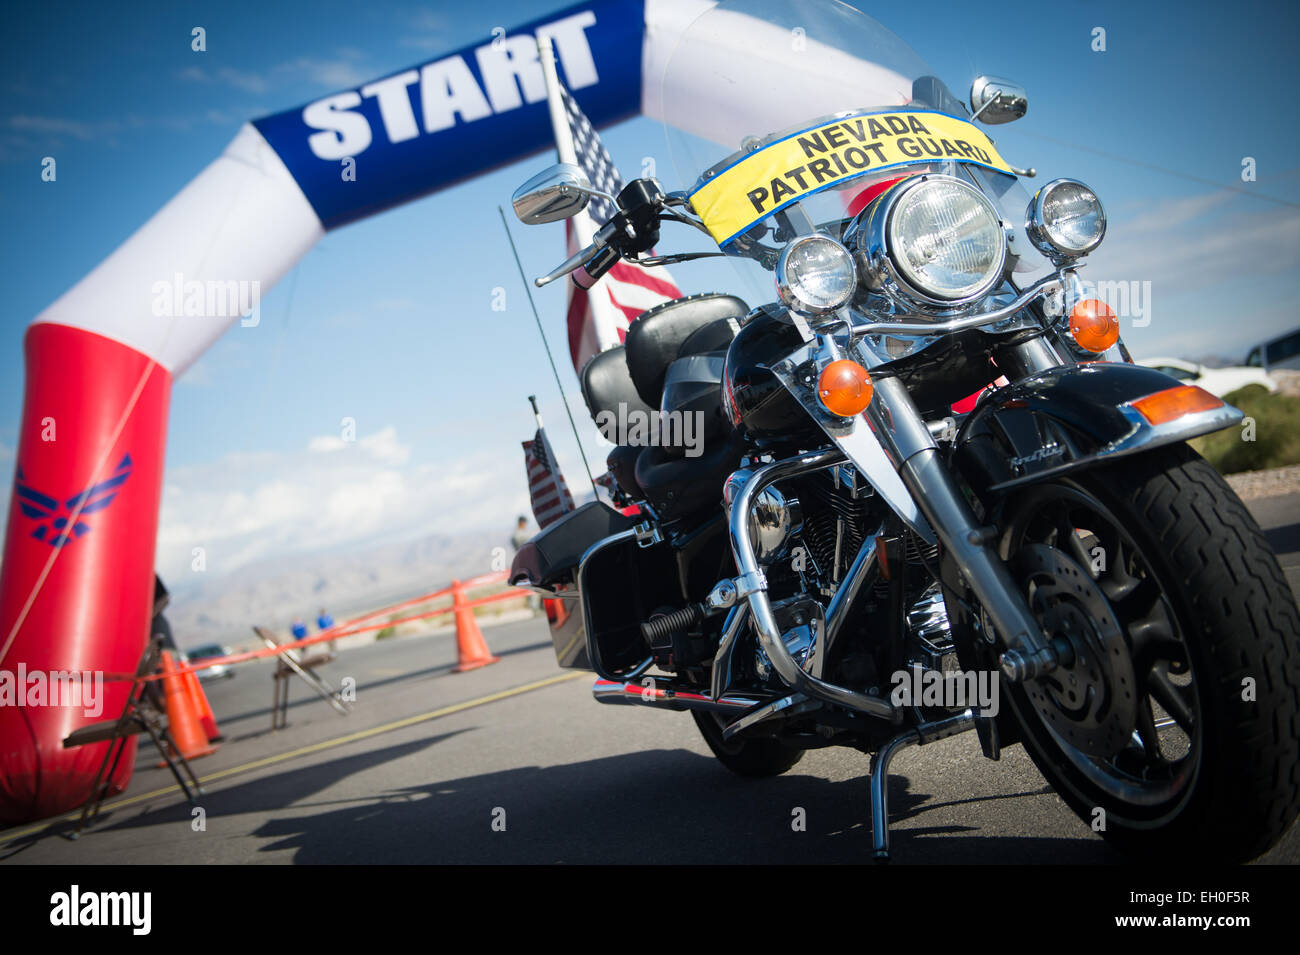 A motorcycle belonging to Peter Doyle, member of the Nevada Patriot Guard, sits at the start of the Air Force Wounded Warrior Trials cycling competition held at Nellis Air Force Base, Nev. Feb. 28, 2015. The Nevada Patriot Guard escorted the participants of the cycling competition around the track. The Air Force Trials are an adaptive sports event designed to promote the mental and physical well-being of seriously ill and injured military members and veterans. More than 105 wounded, ill or injured service men and women from around the country will compete for a spot on the 2015 U.S. Air Force Stock Photo